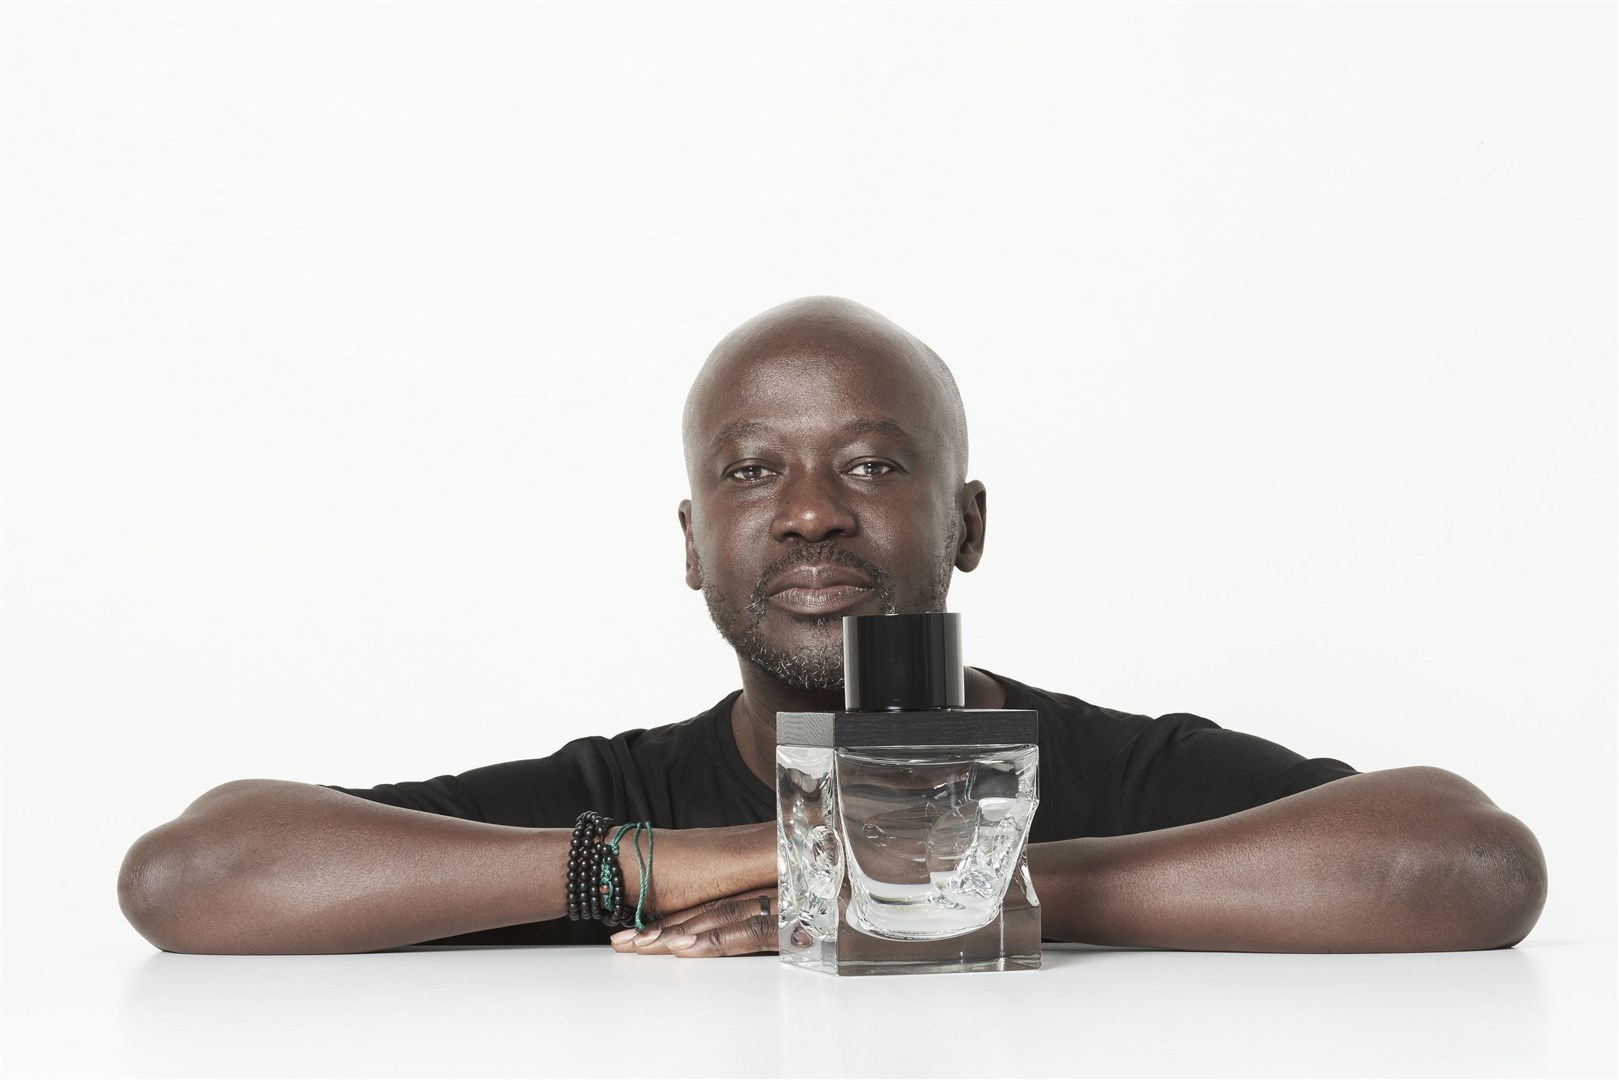 Architect and designer Sir David Adjaye OBE, who was creative partner for the whisky release.